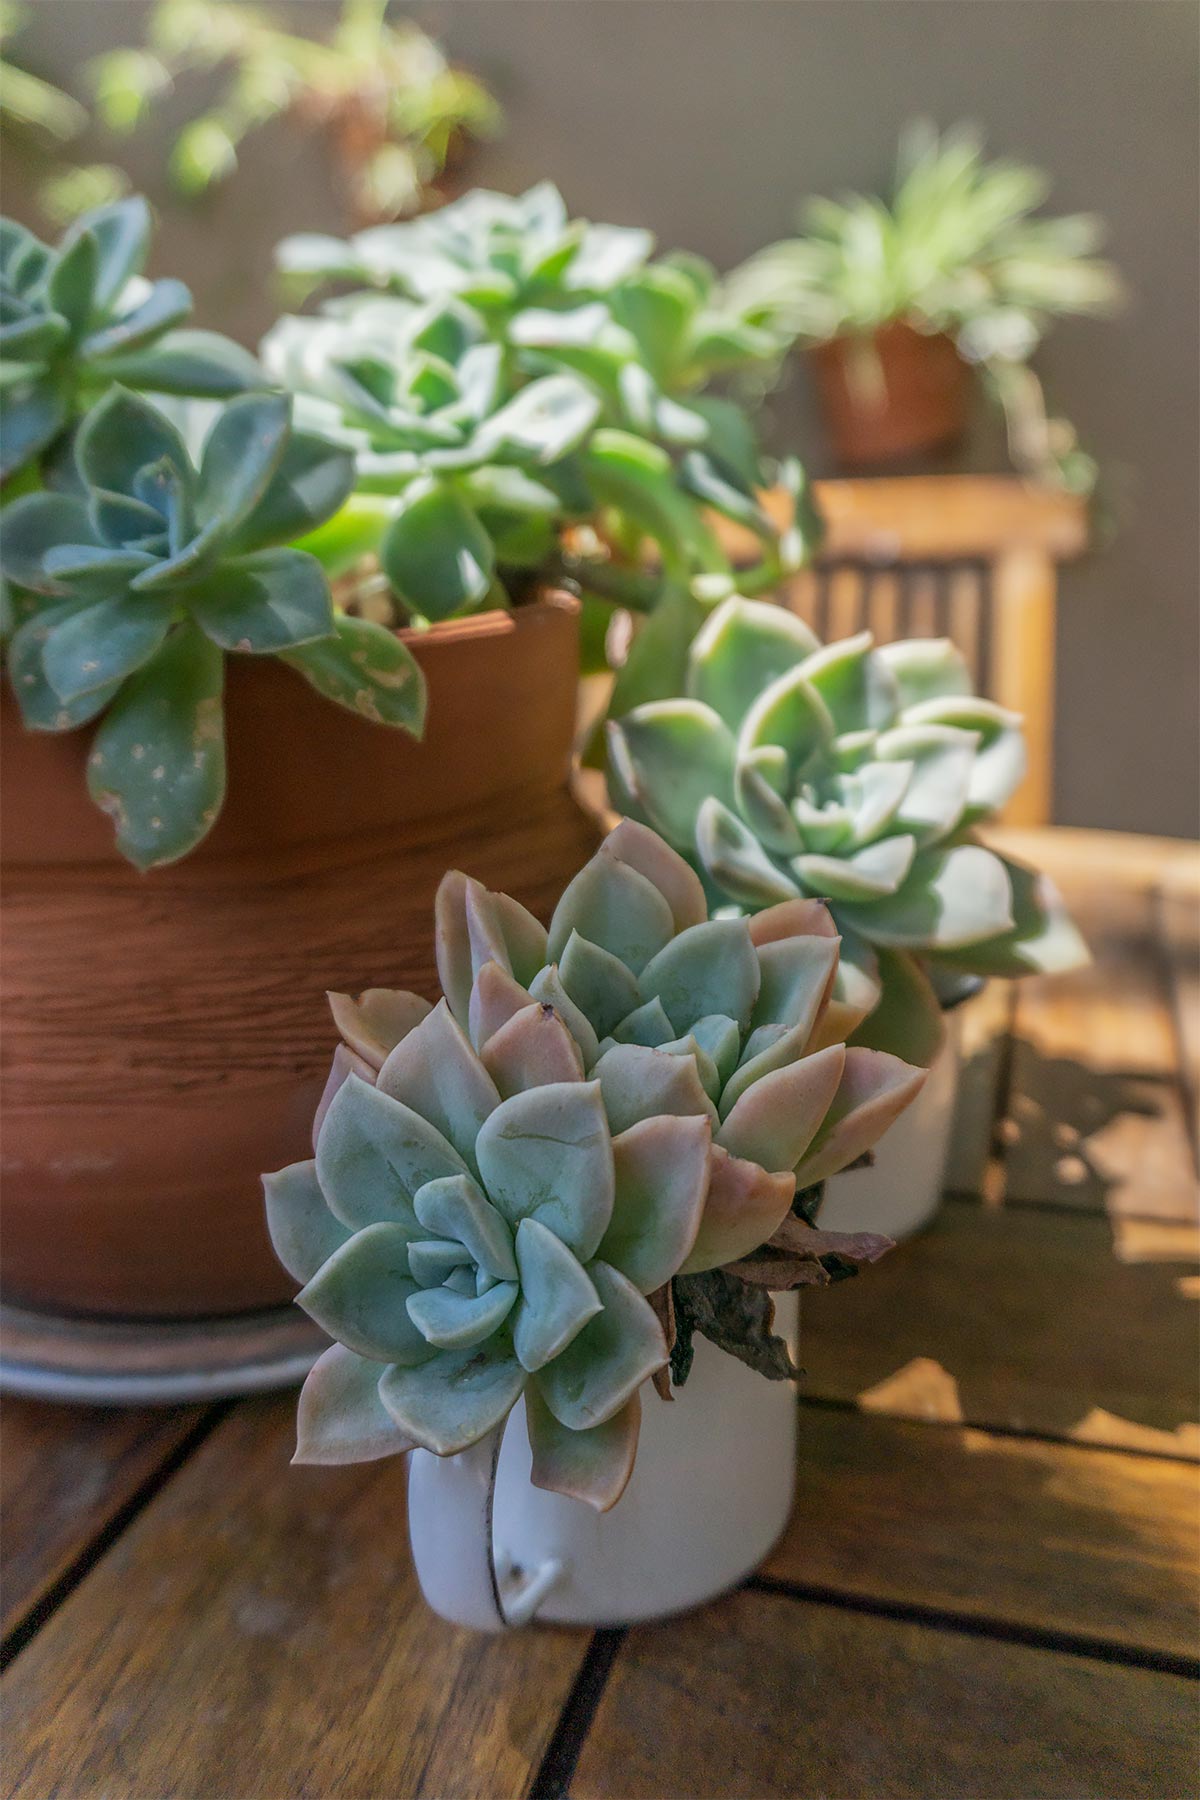 Echeveria succulent_Plant Photography by Soonafternoon Copyright